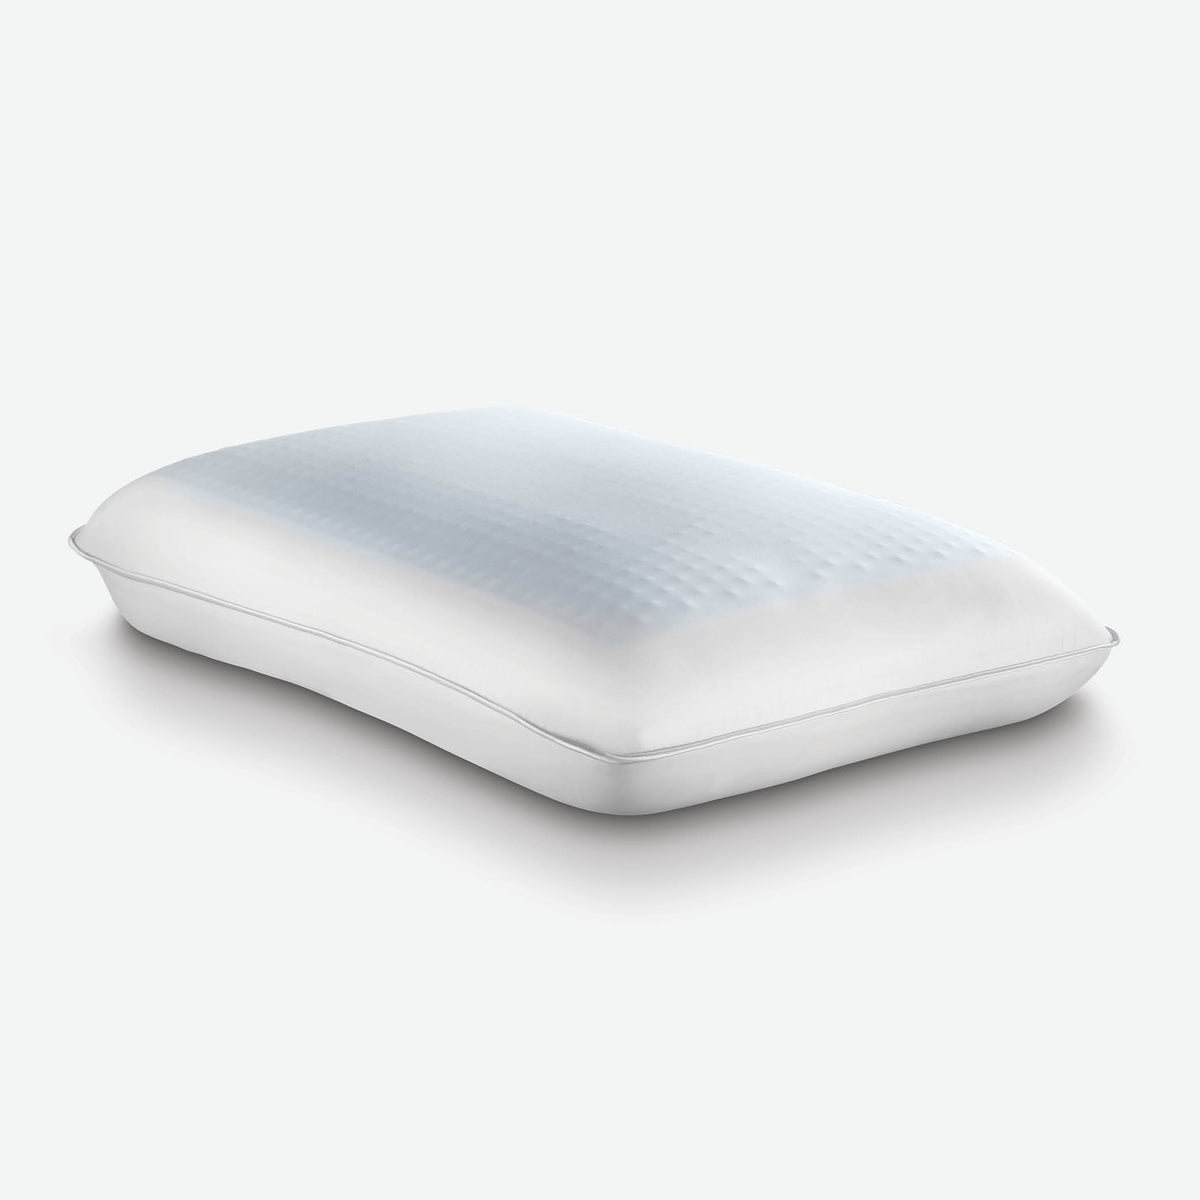 Image of the Cooling Replenish Pillow with the cool gel side facing up on a white background